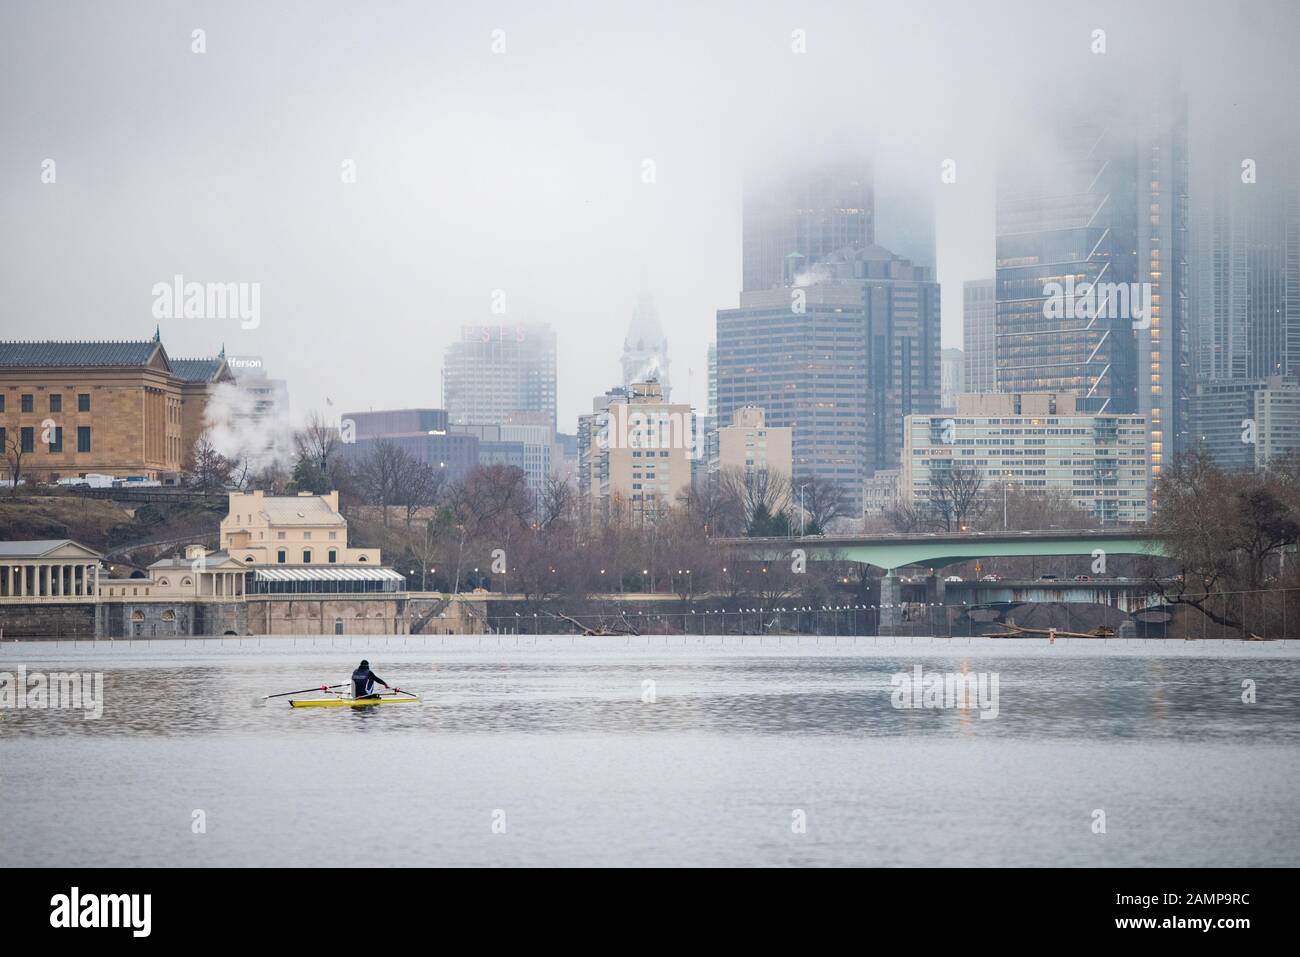 A single rower in a scull rows on a river in front of a mist-covered cityscape. Stock Photo